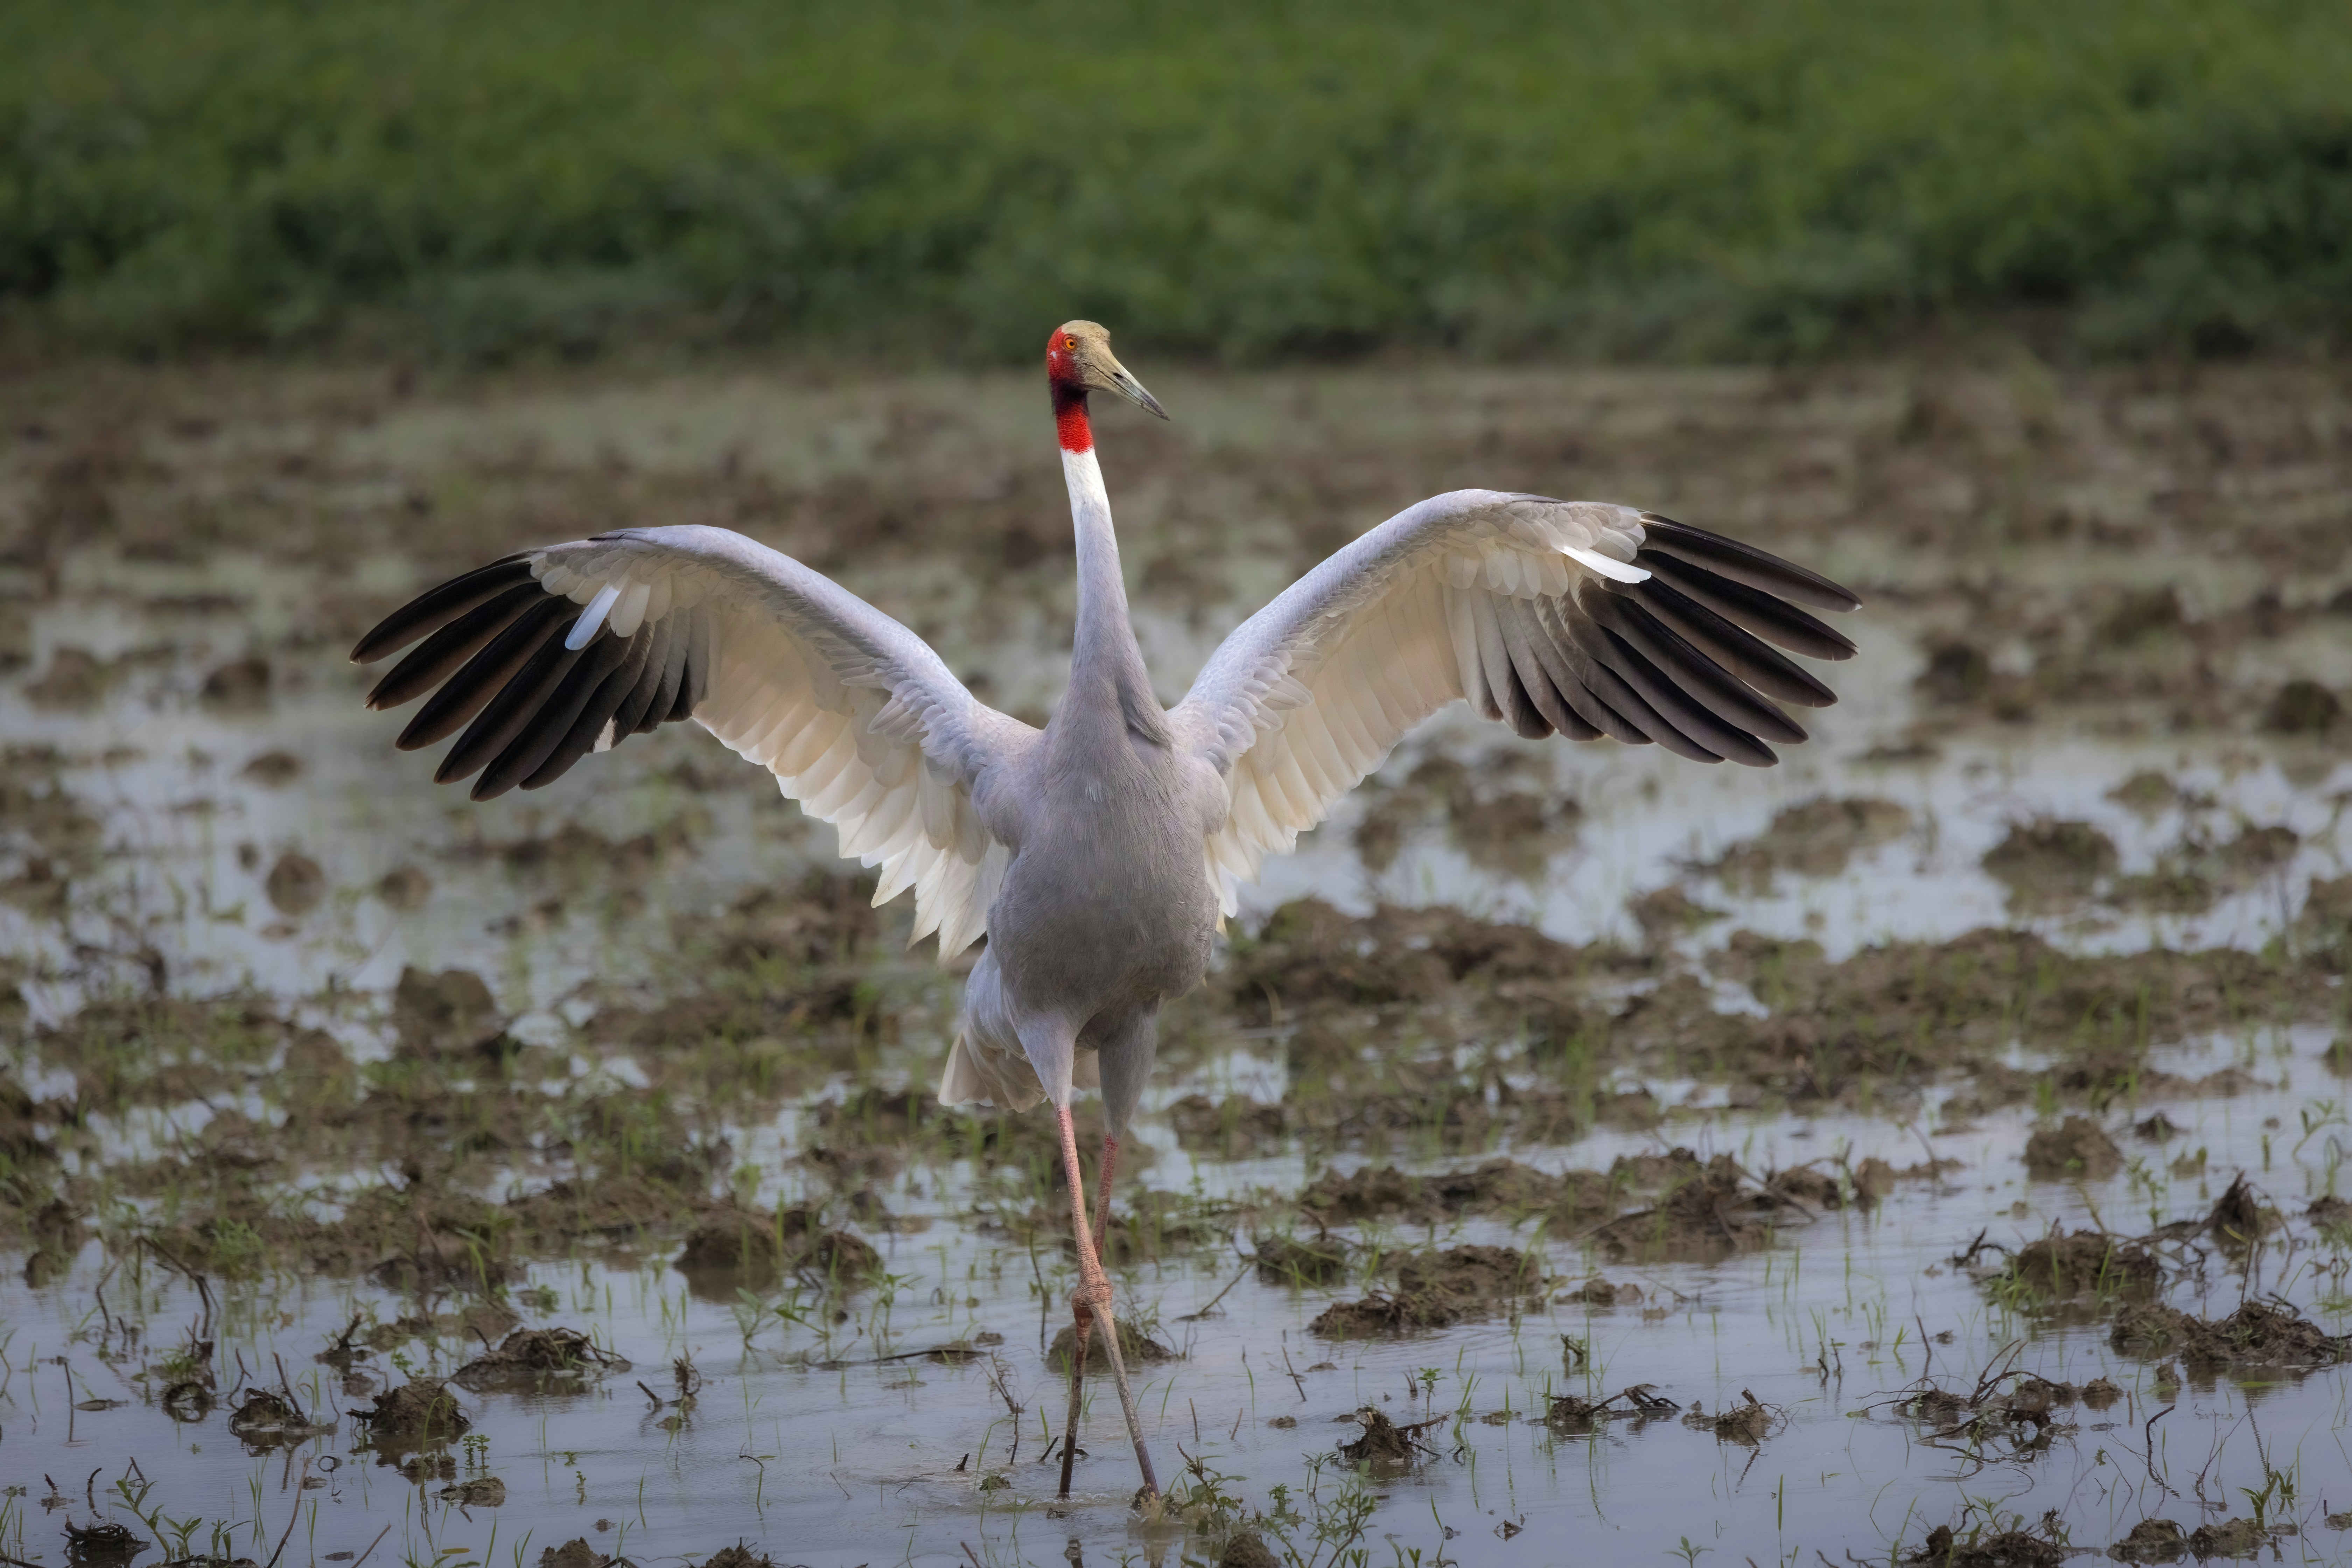 A Sarus crane stretching its wings